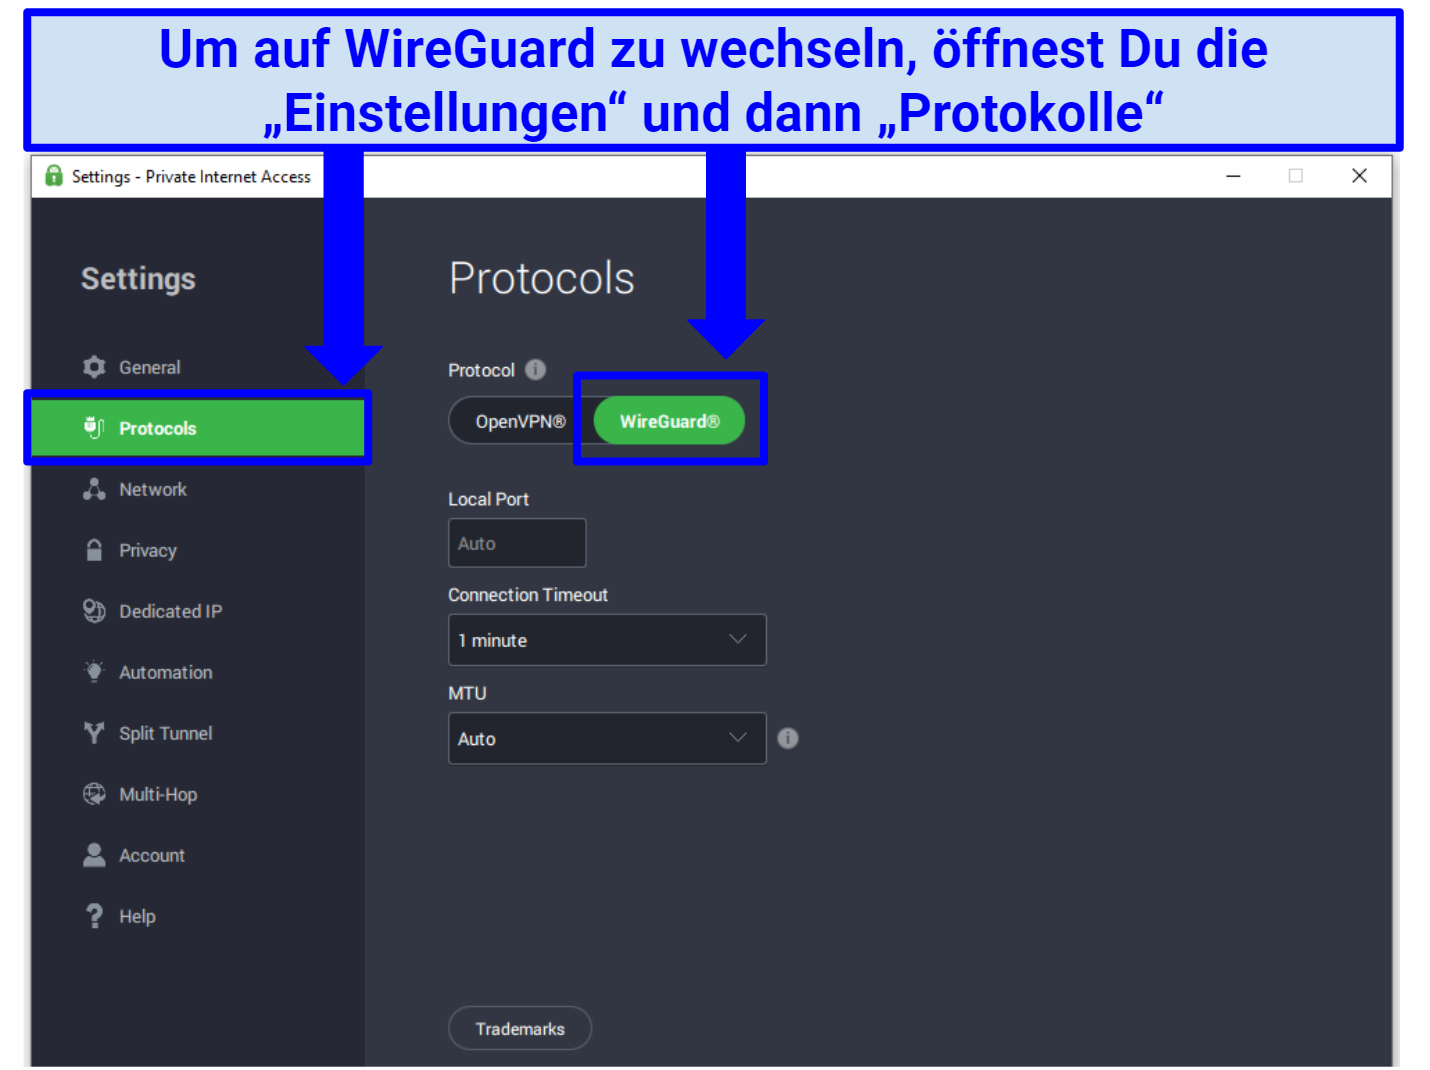 Screenshot of the PIA app interface showing the OpenVPN and WireGuard protocols